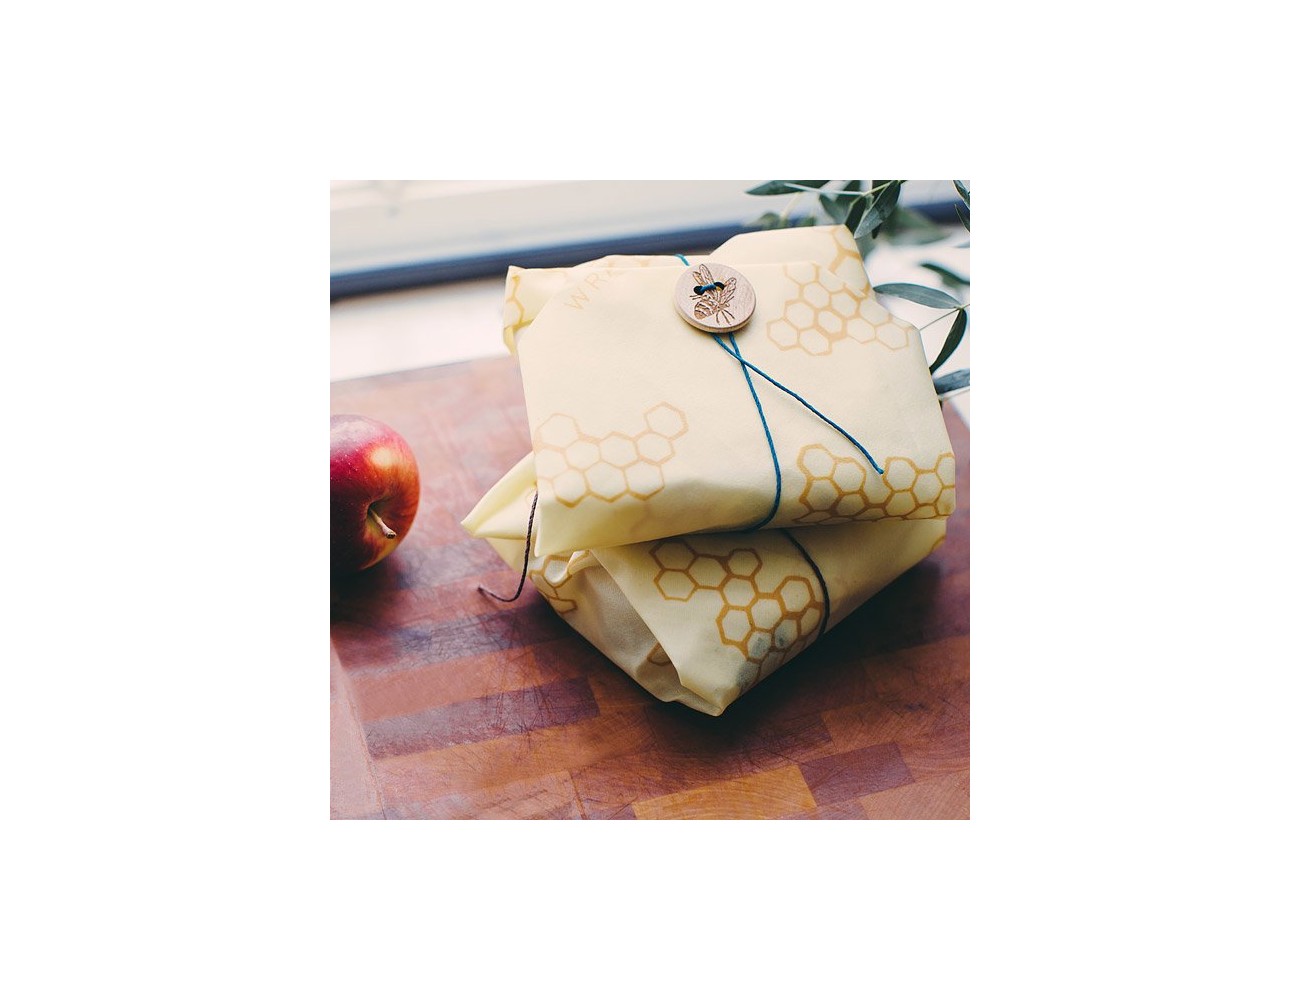 Pine Resin for DIY Beeswax Wraps, Pine Rosin, Skincare & More Sustainably  Harvested USA Zero-waste for Soap Salves Make Beeswax Wrap 